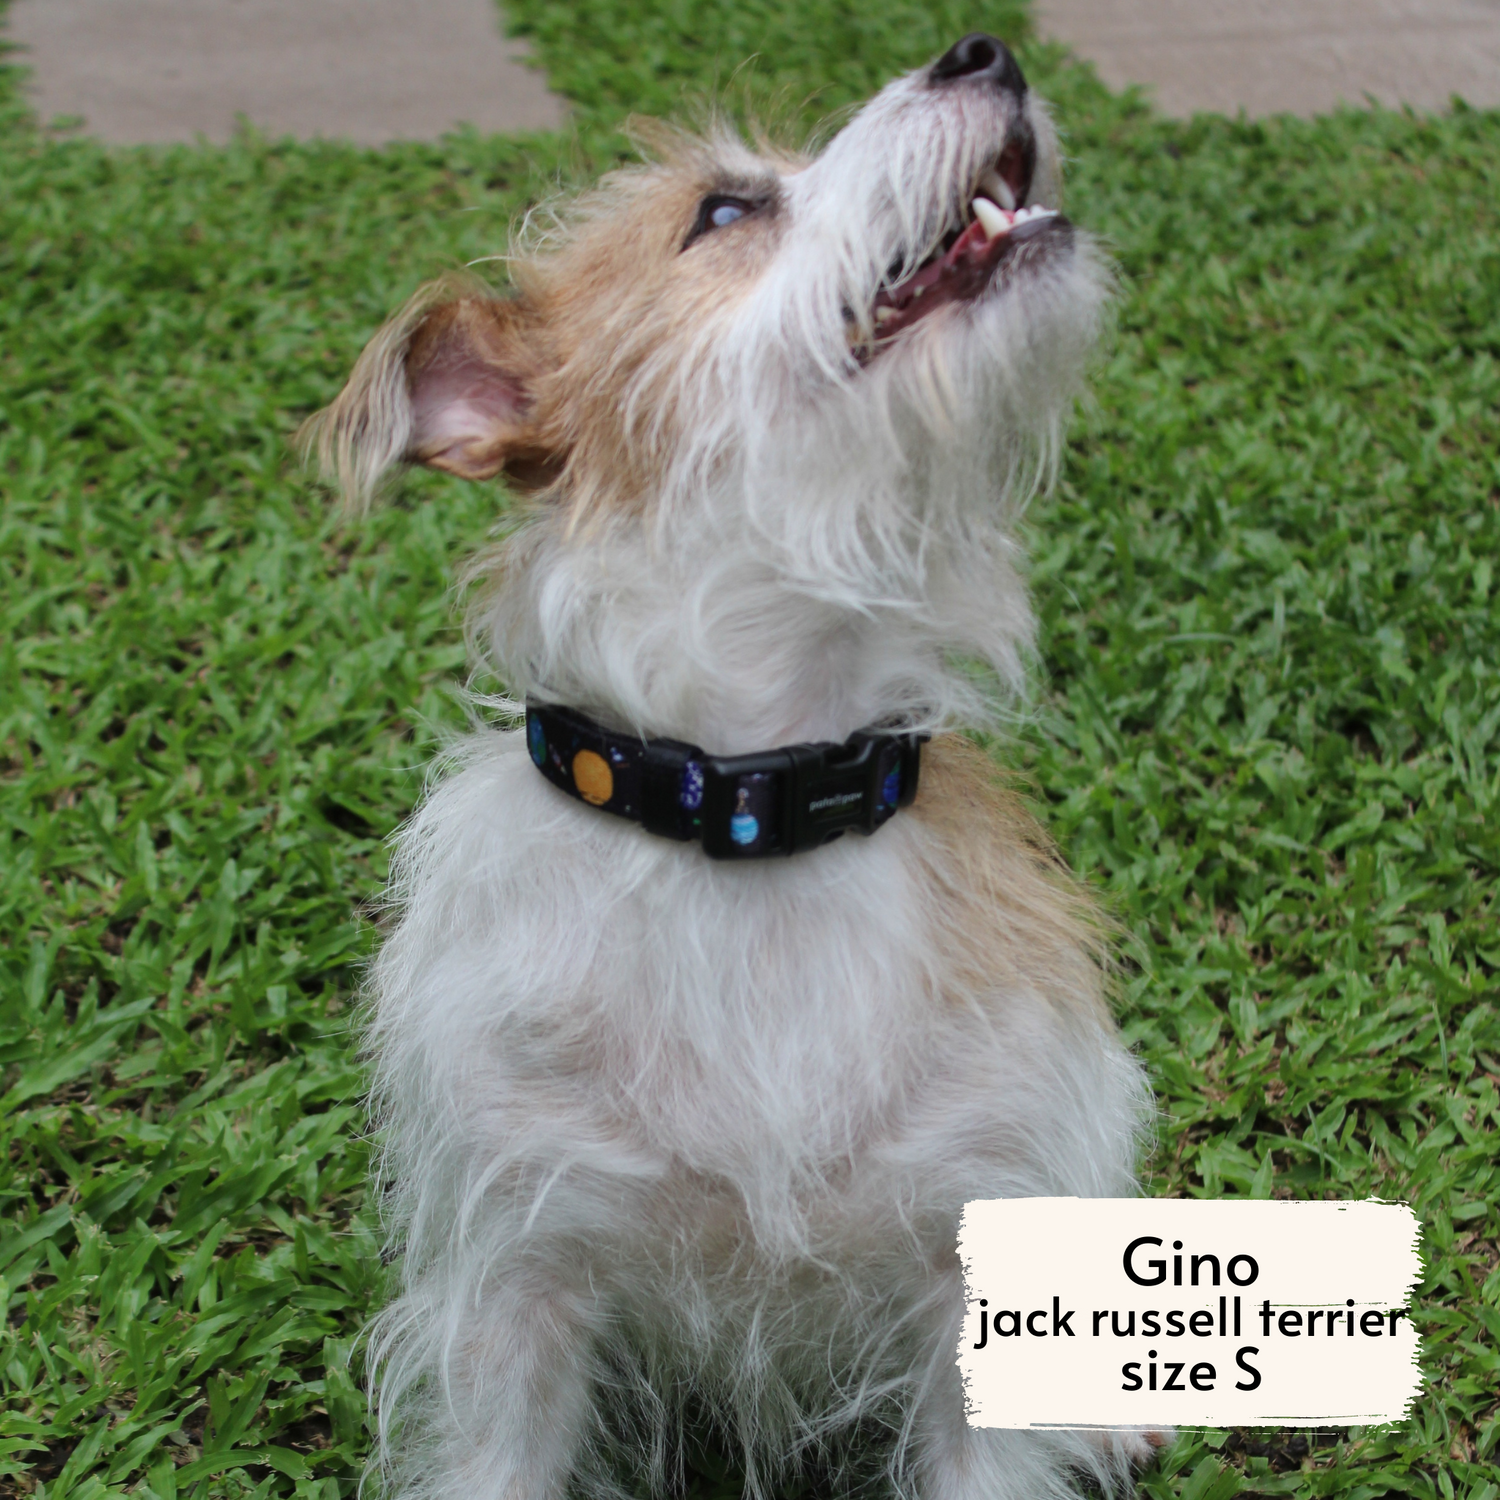 Pata Paw space explorer collar as seen on a small-sized dog, Gino, a Jack Russell Terrier